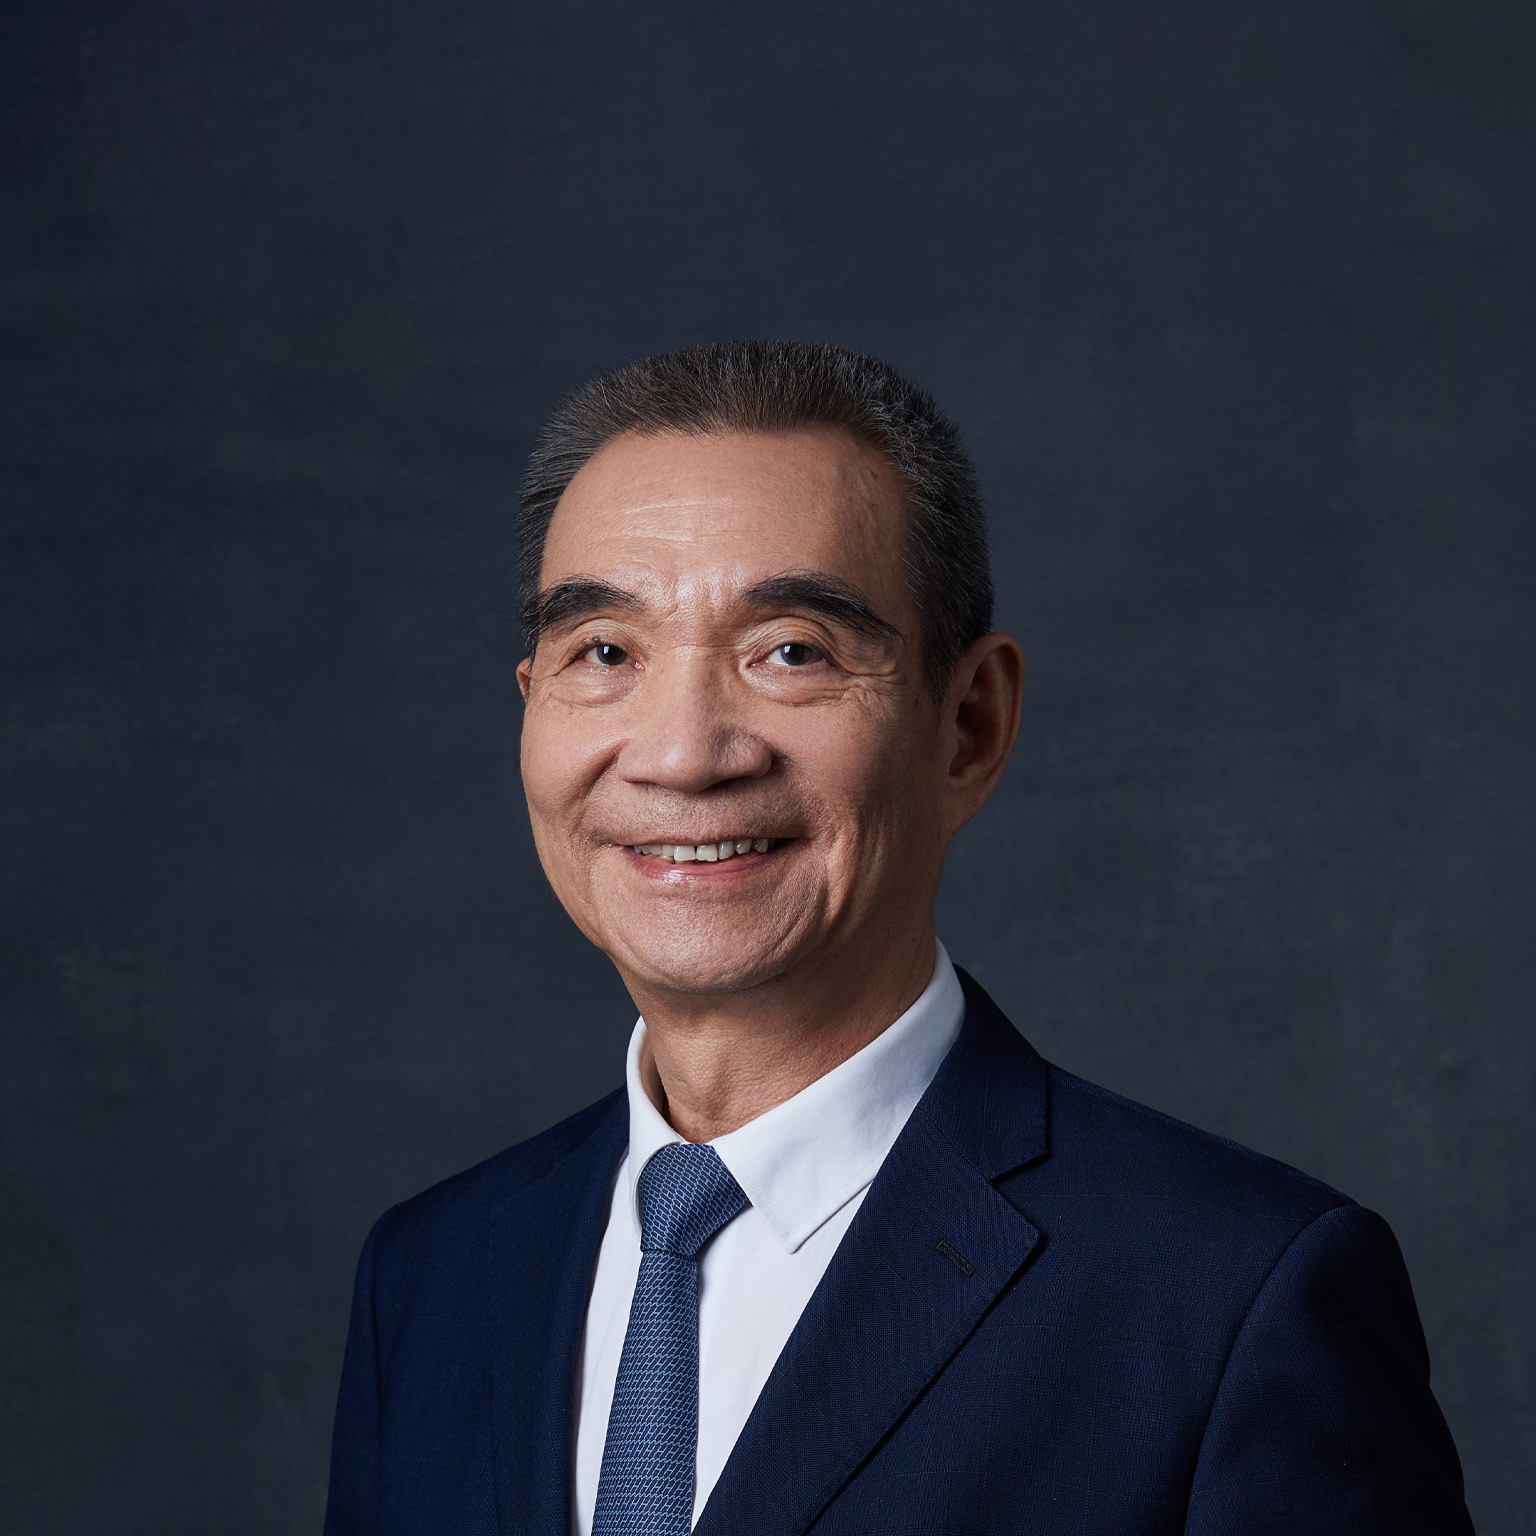 Forward Thinking on the recipe for Asia’s success story with Justin Yifu Lin